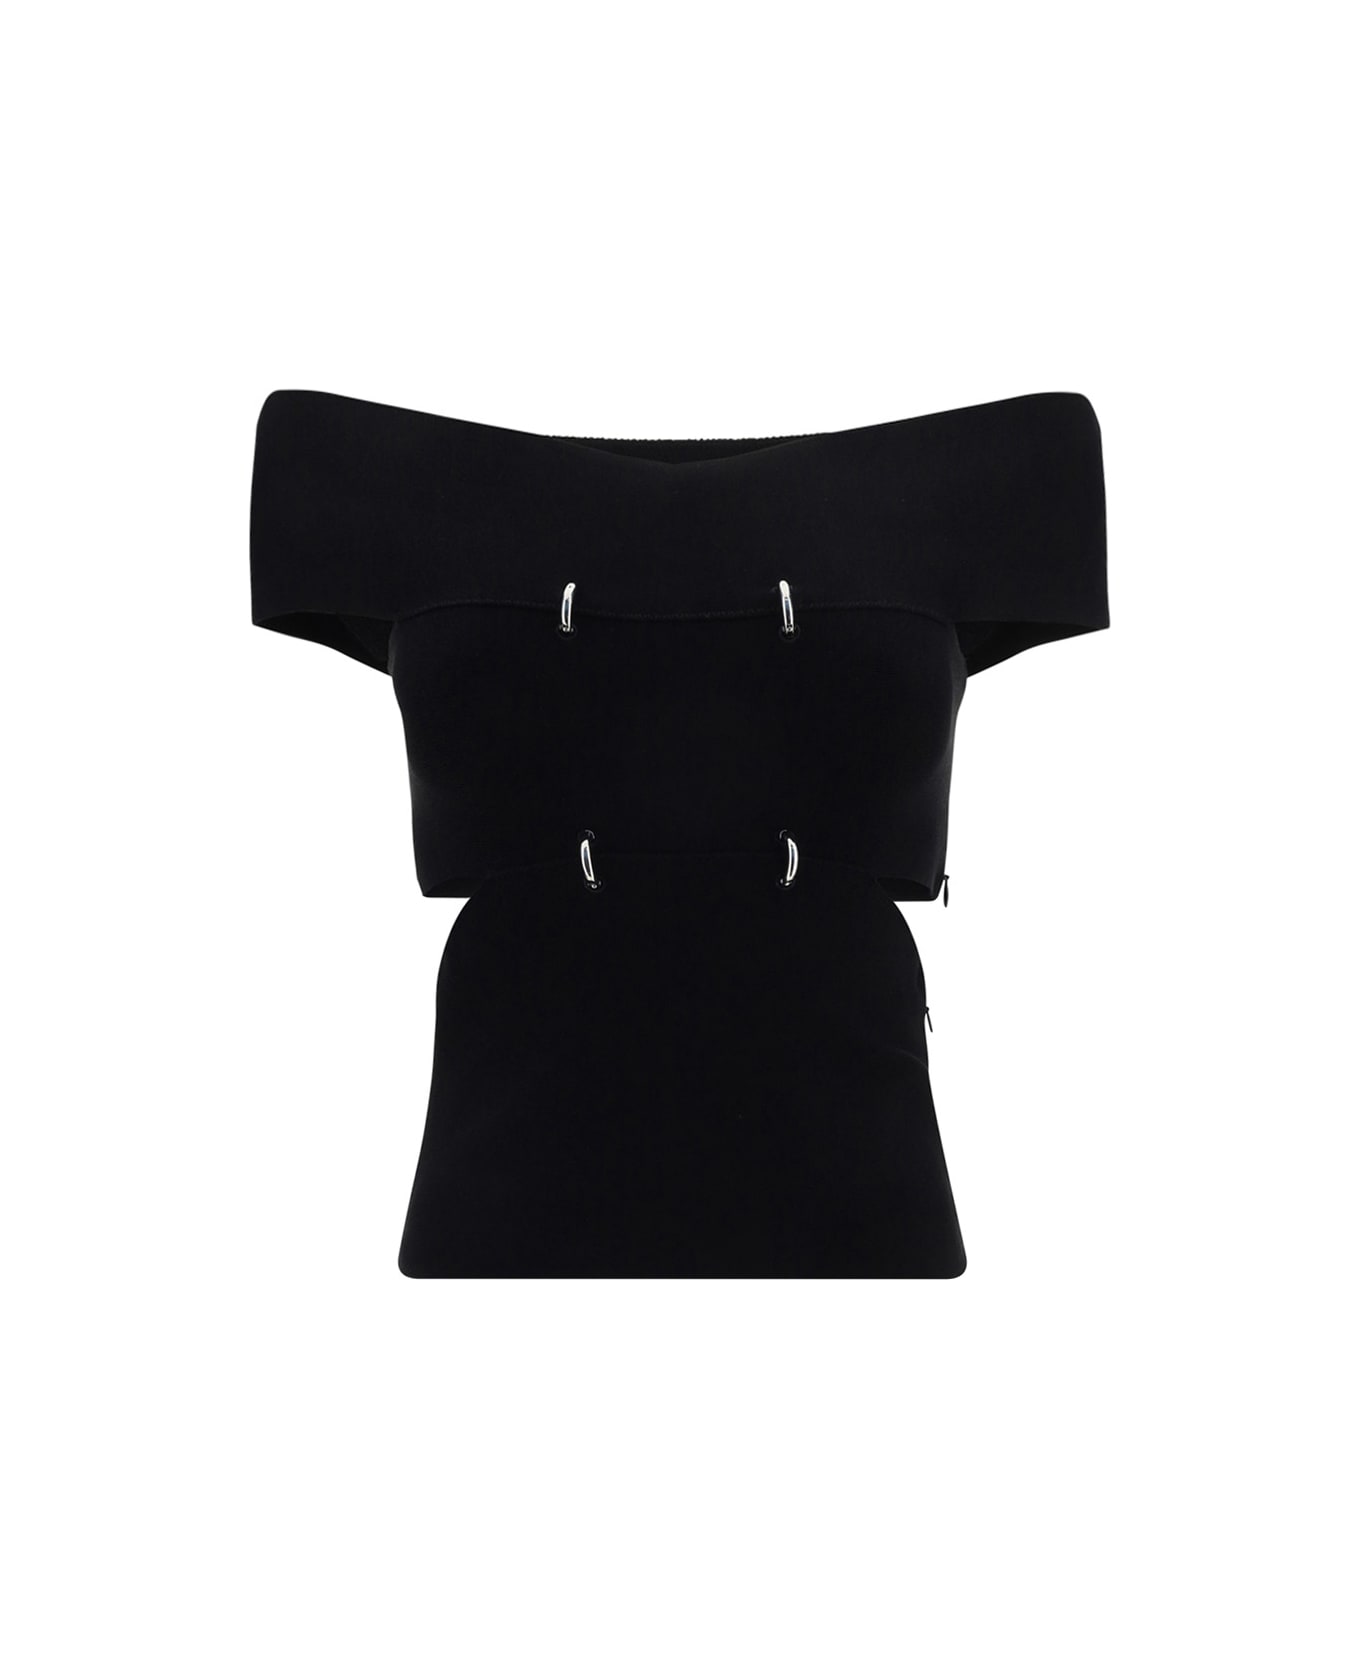 Alexander McQueen Top With Cut-out Details - Black